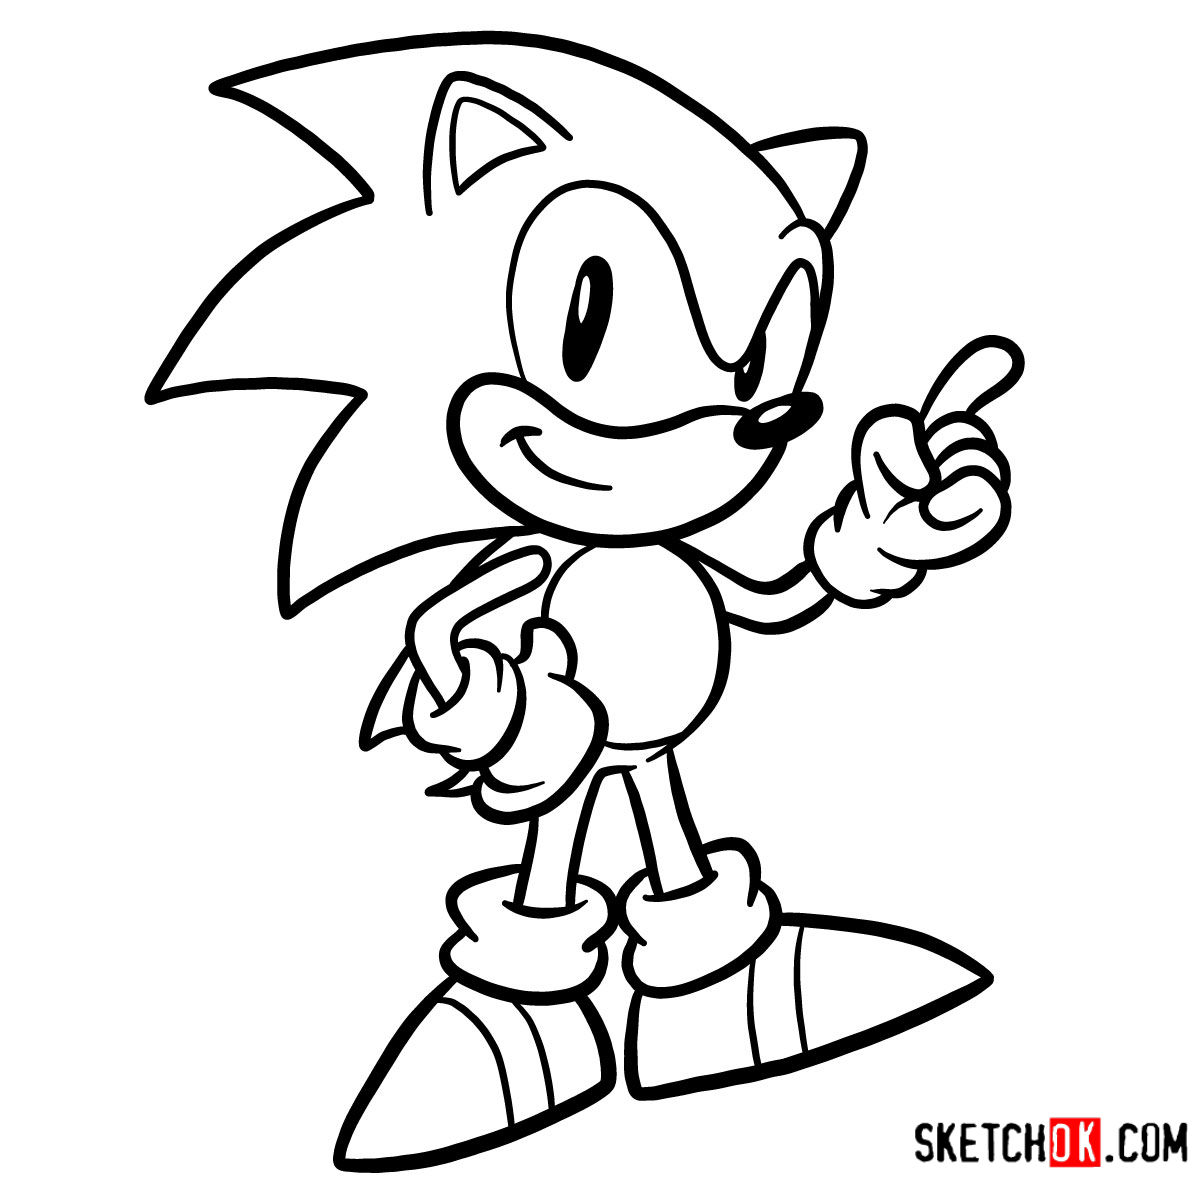 How to Draw Sonic The Hedgehog Outline Drawing | Easy Sonic Character Full  Sketch Step by Step - YouTube